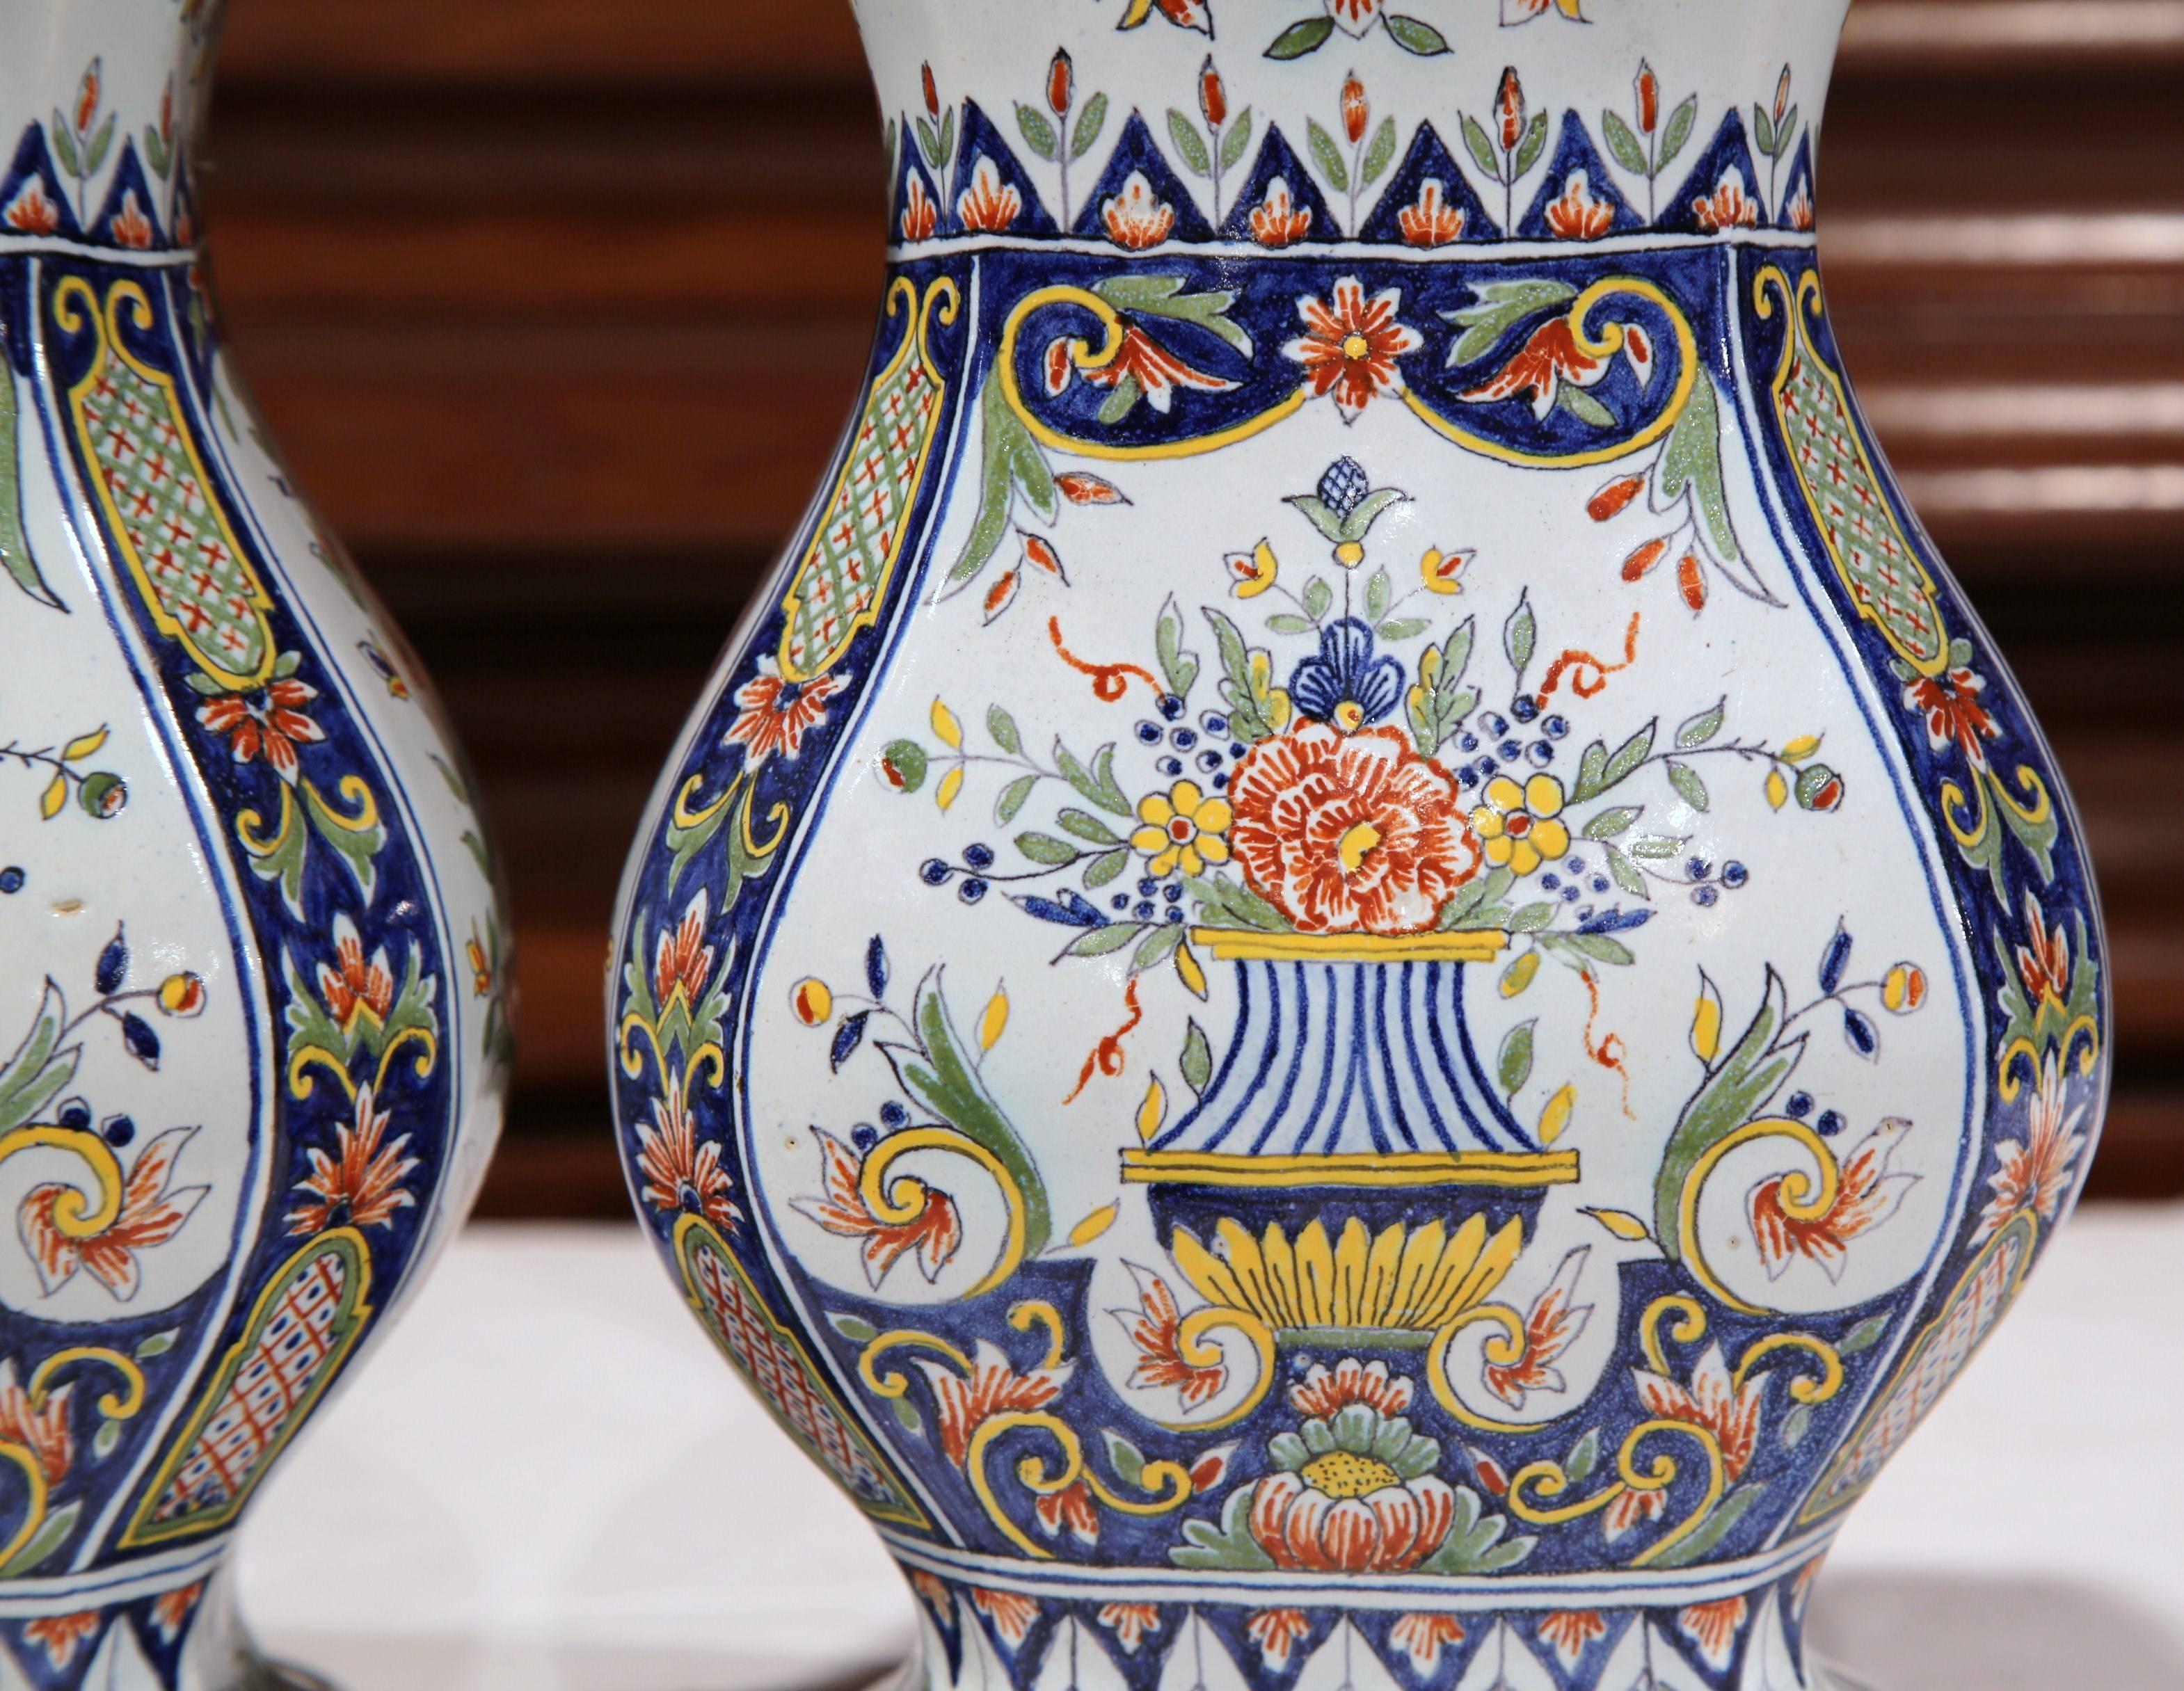 Ceramic Pair of 19th Century French Hand-Painted Faience Vases from Normandy